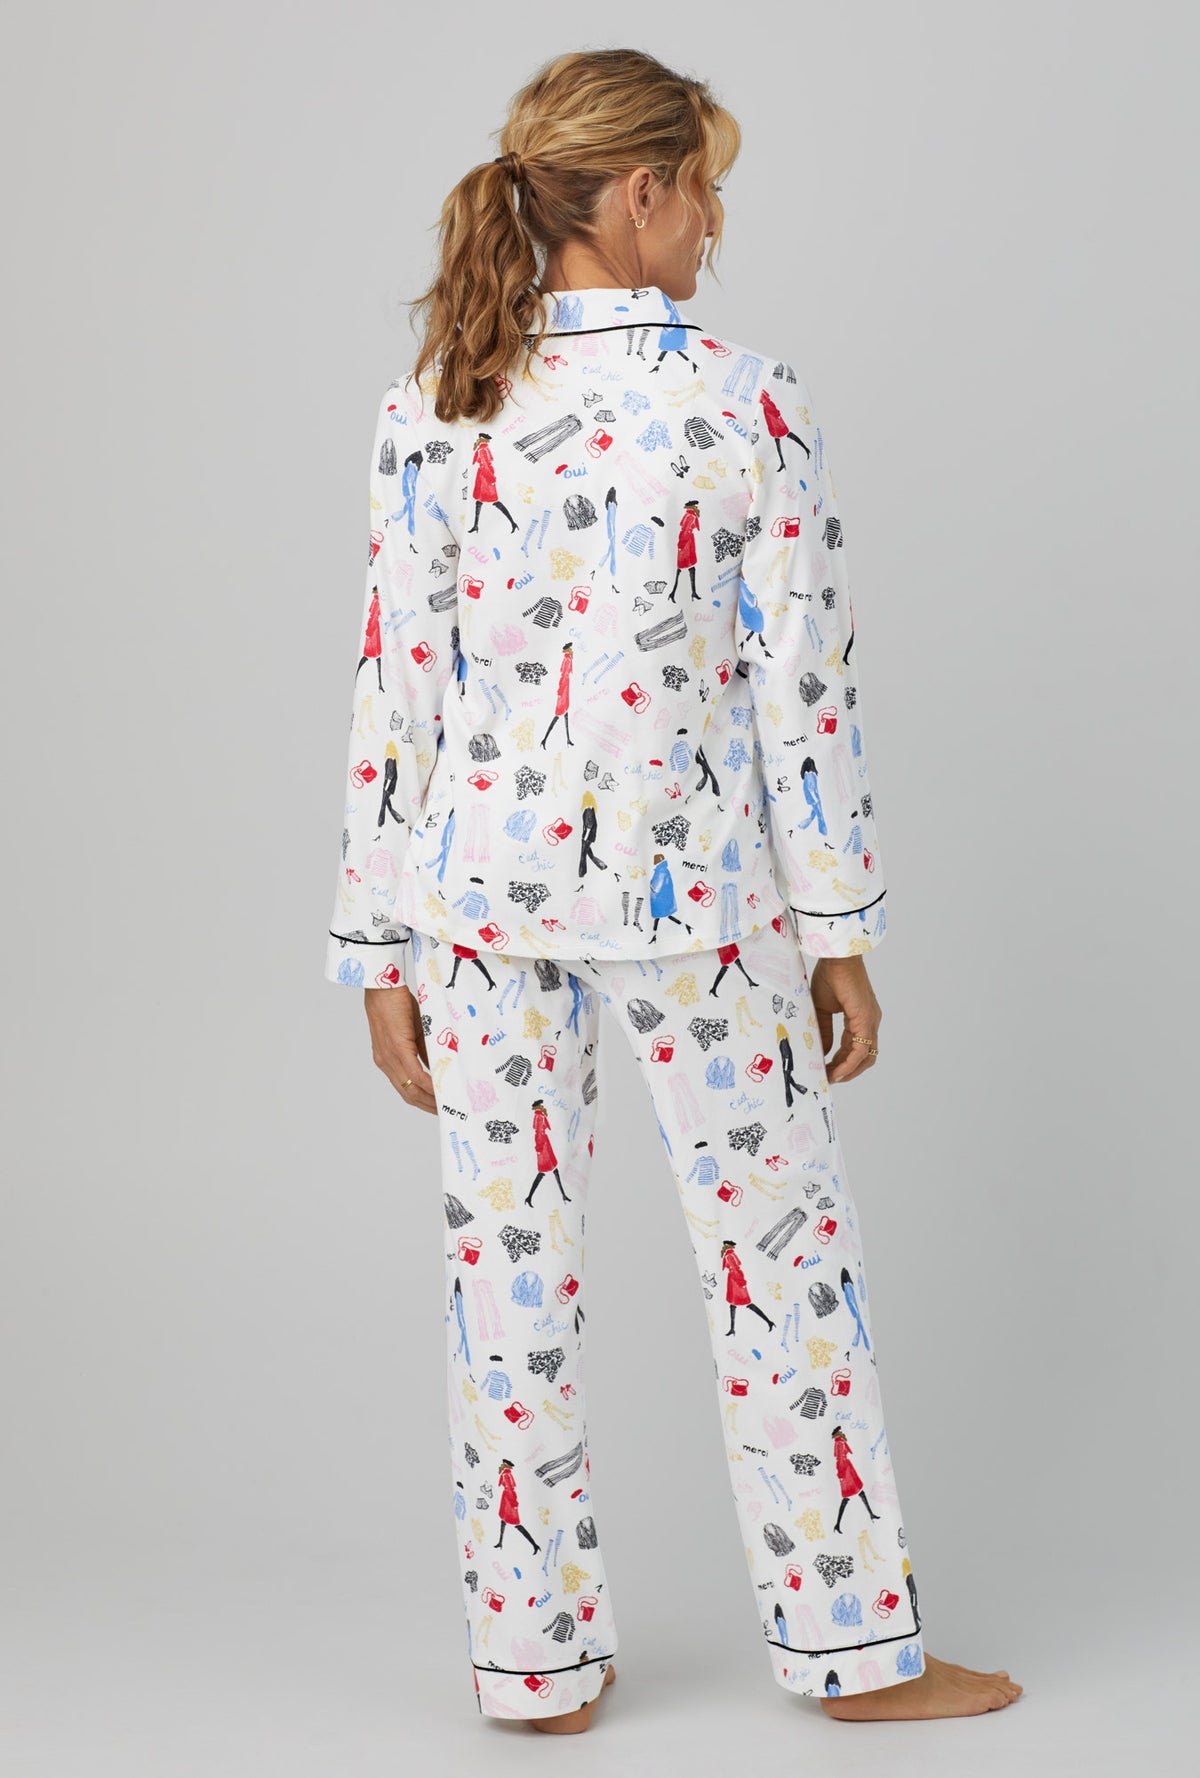 A lady wearing  white Long Sleeve Classic Stretch Jersey PJ Set with Cest Chic  print